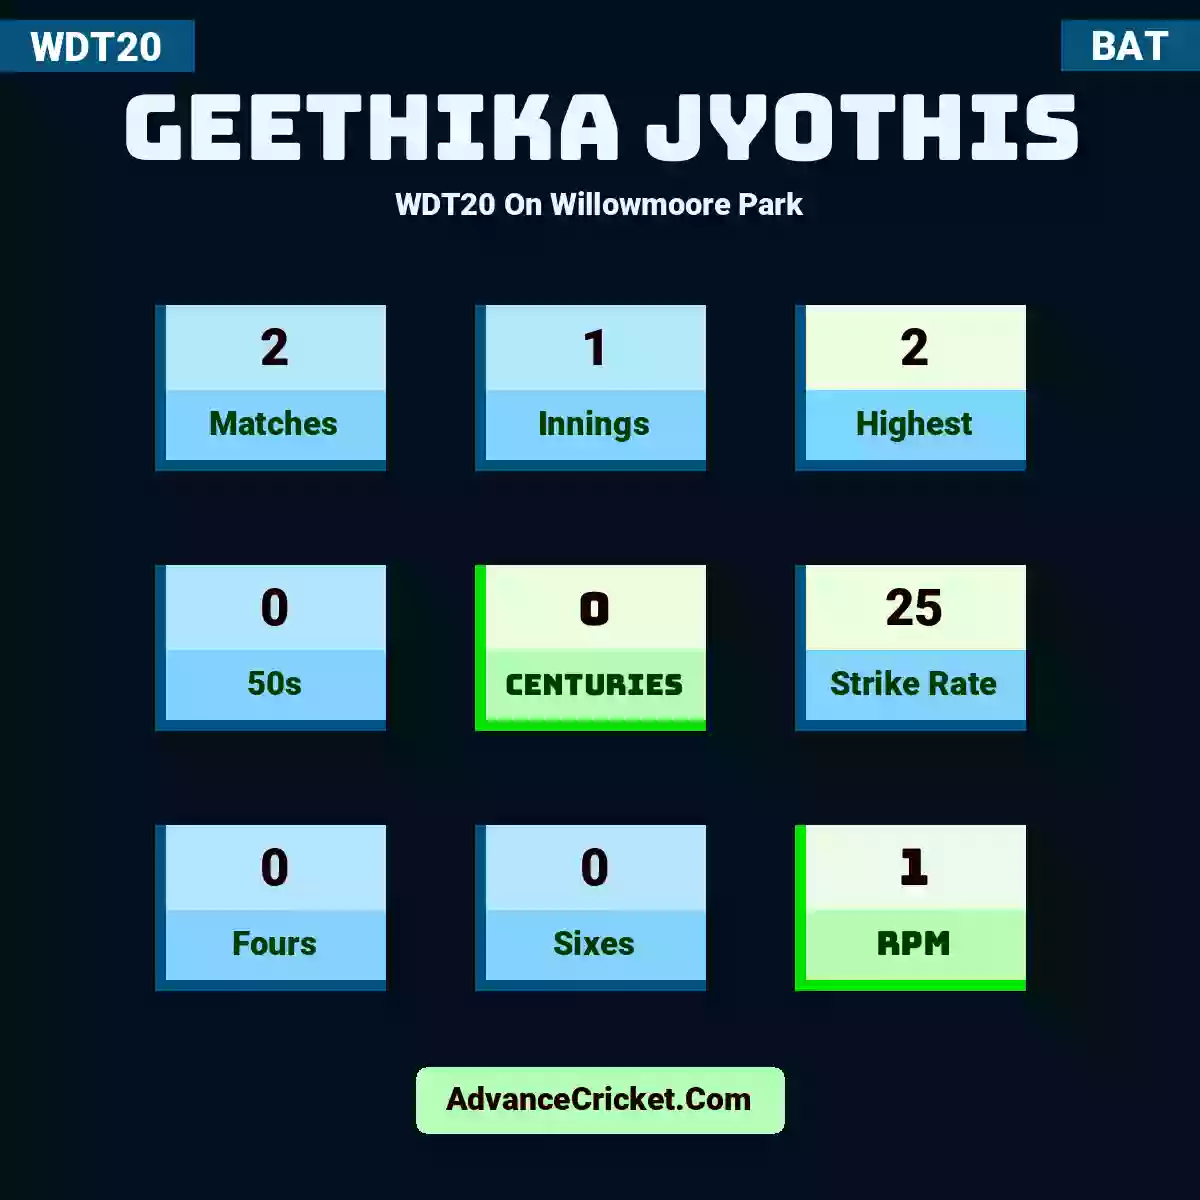 Geethika Jyothis WDT20  On Willowmoore Park, Geethika Jyothis played 2 matches, scored 2 runs as highest, 0 half-centuries, and 0 centuries, with a strike rate of 25. G.Jyothis hit 0 fours and 0 sixes, with an RPM of 1.